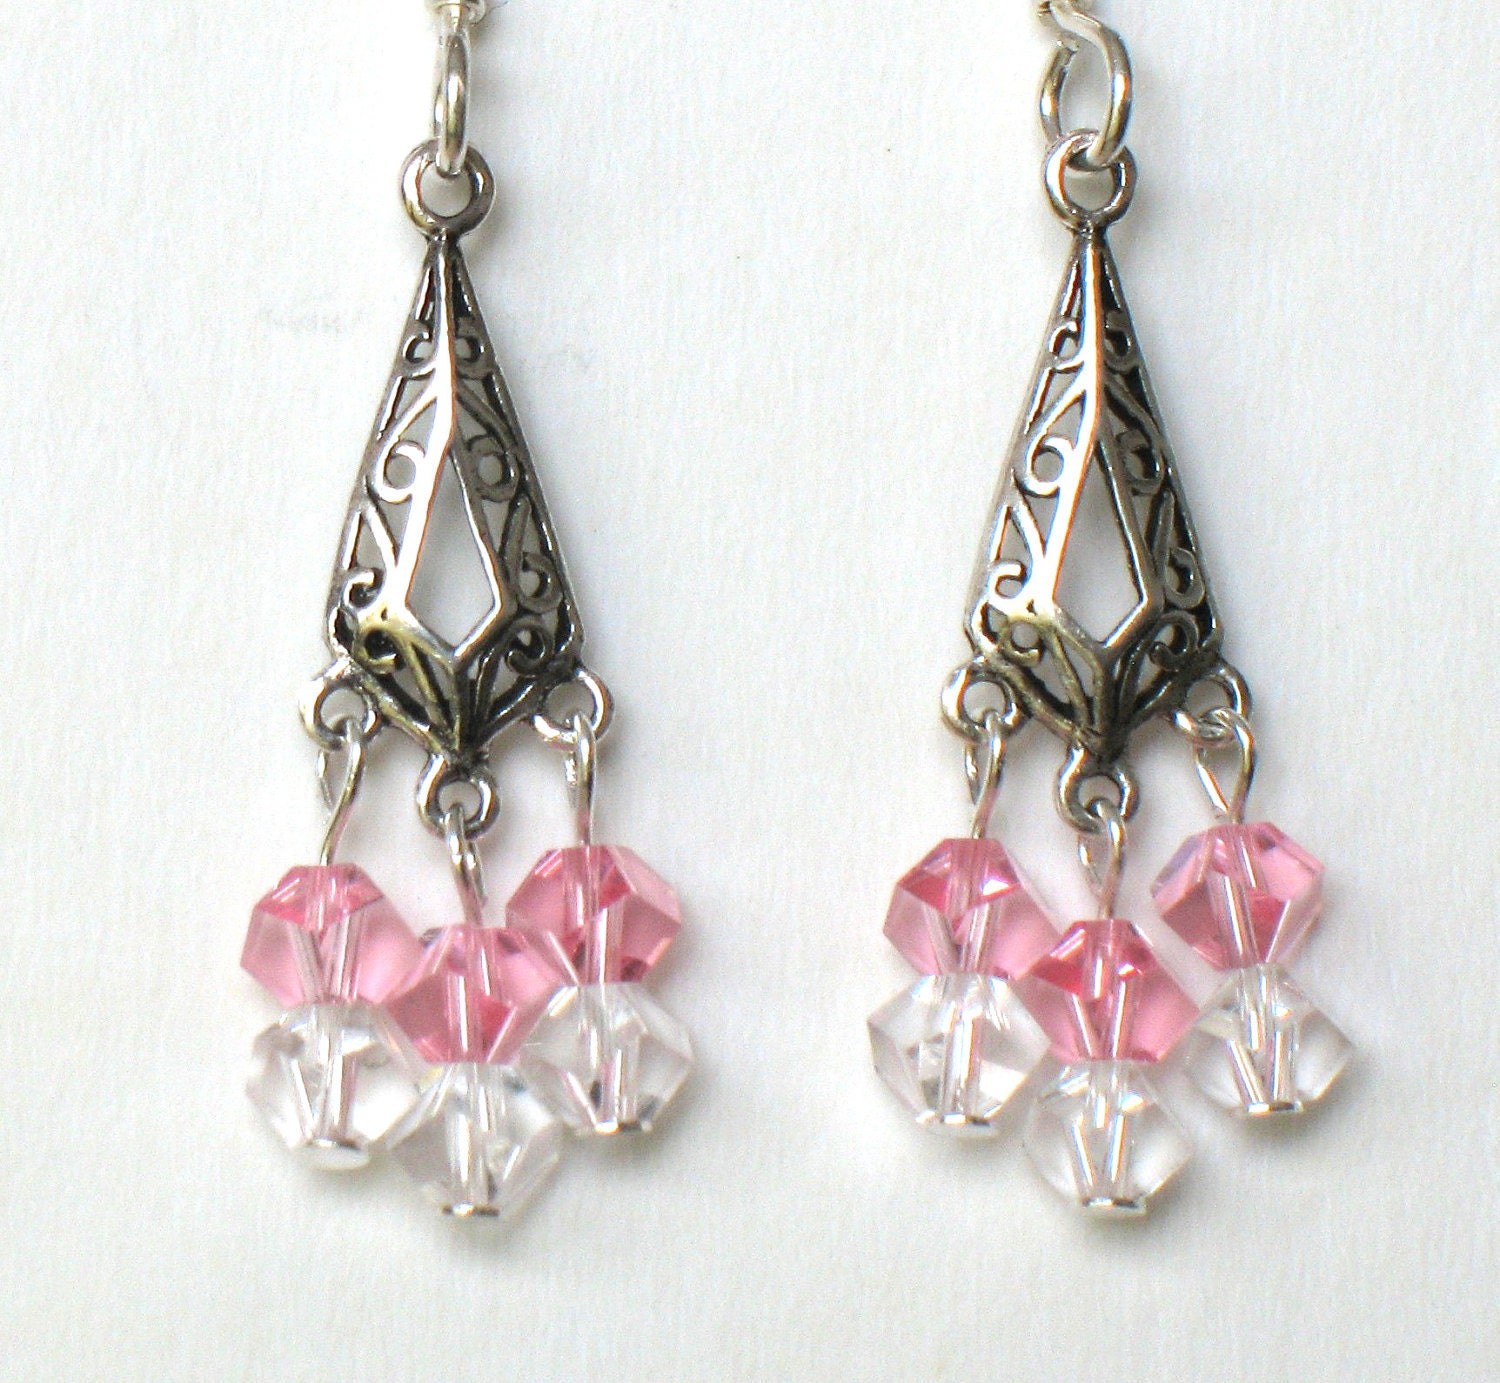 Crystal  and Sterling Silver Chandelier Earrings With Pink Swarovski Elements